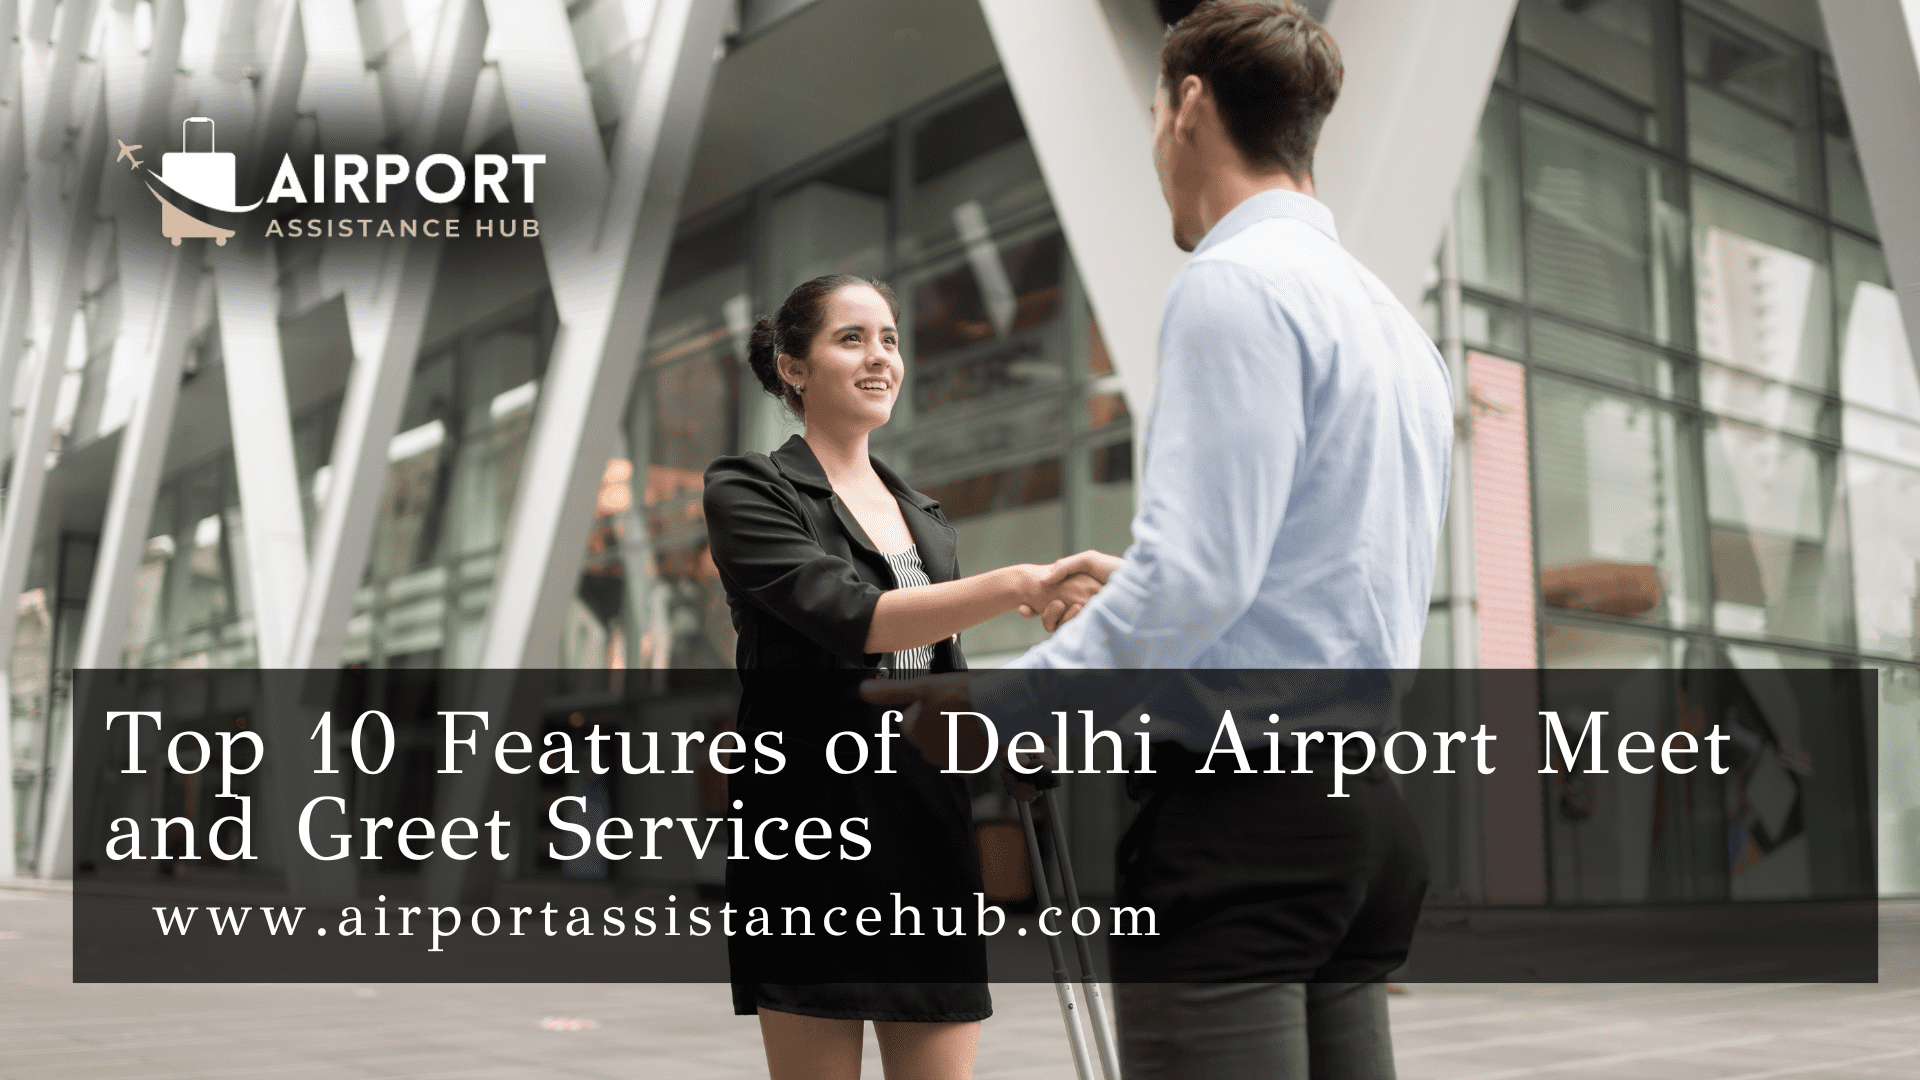 Top 10 Features of Delhi Airport Meet and Greet Services